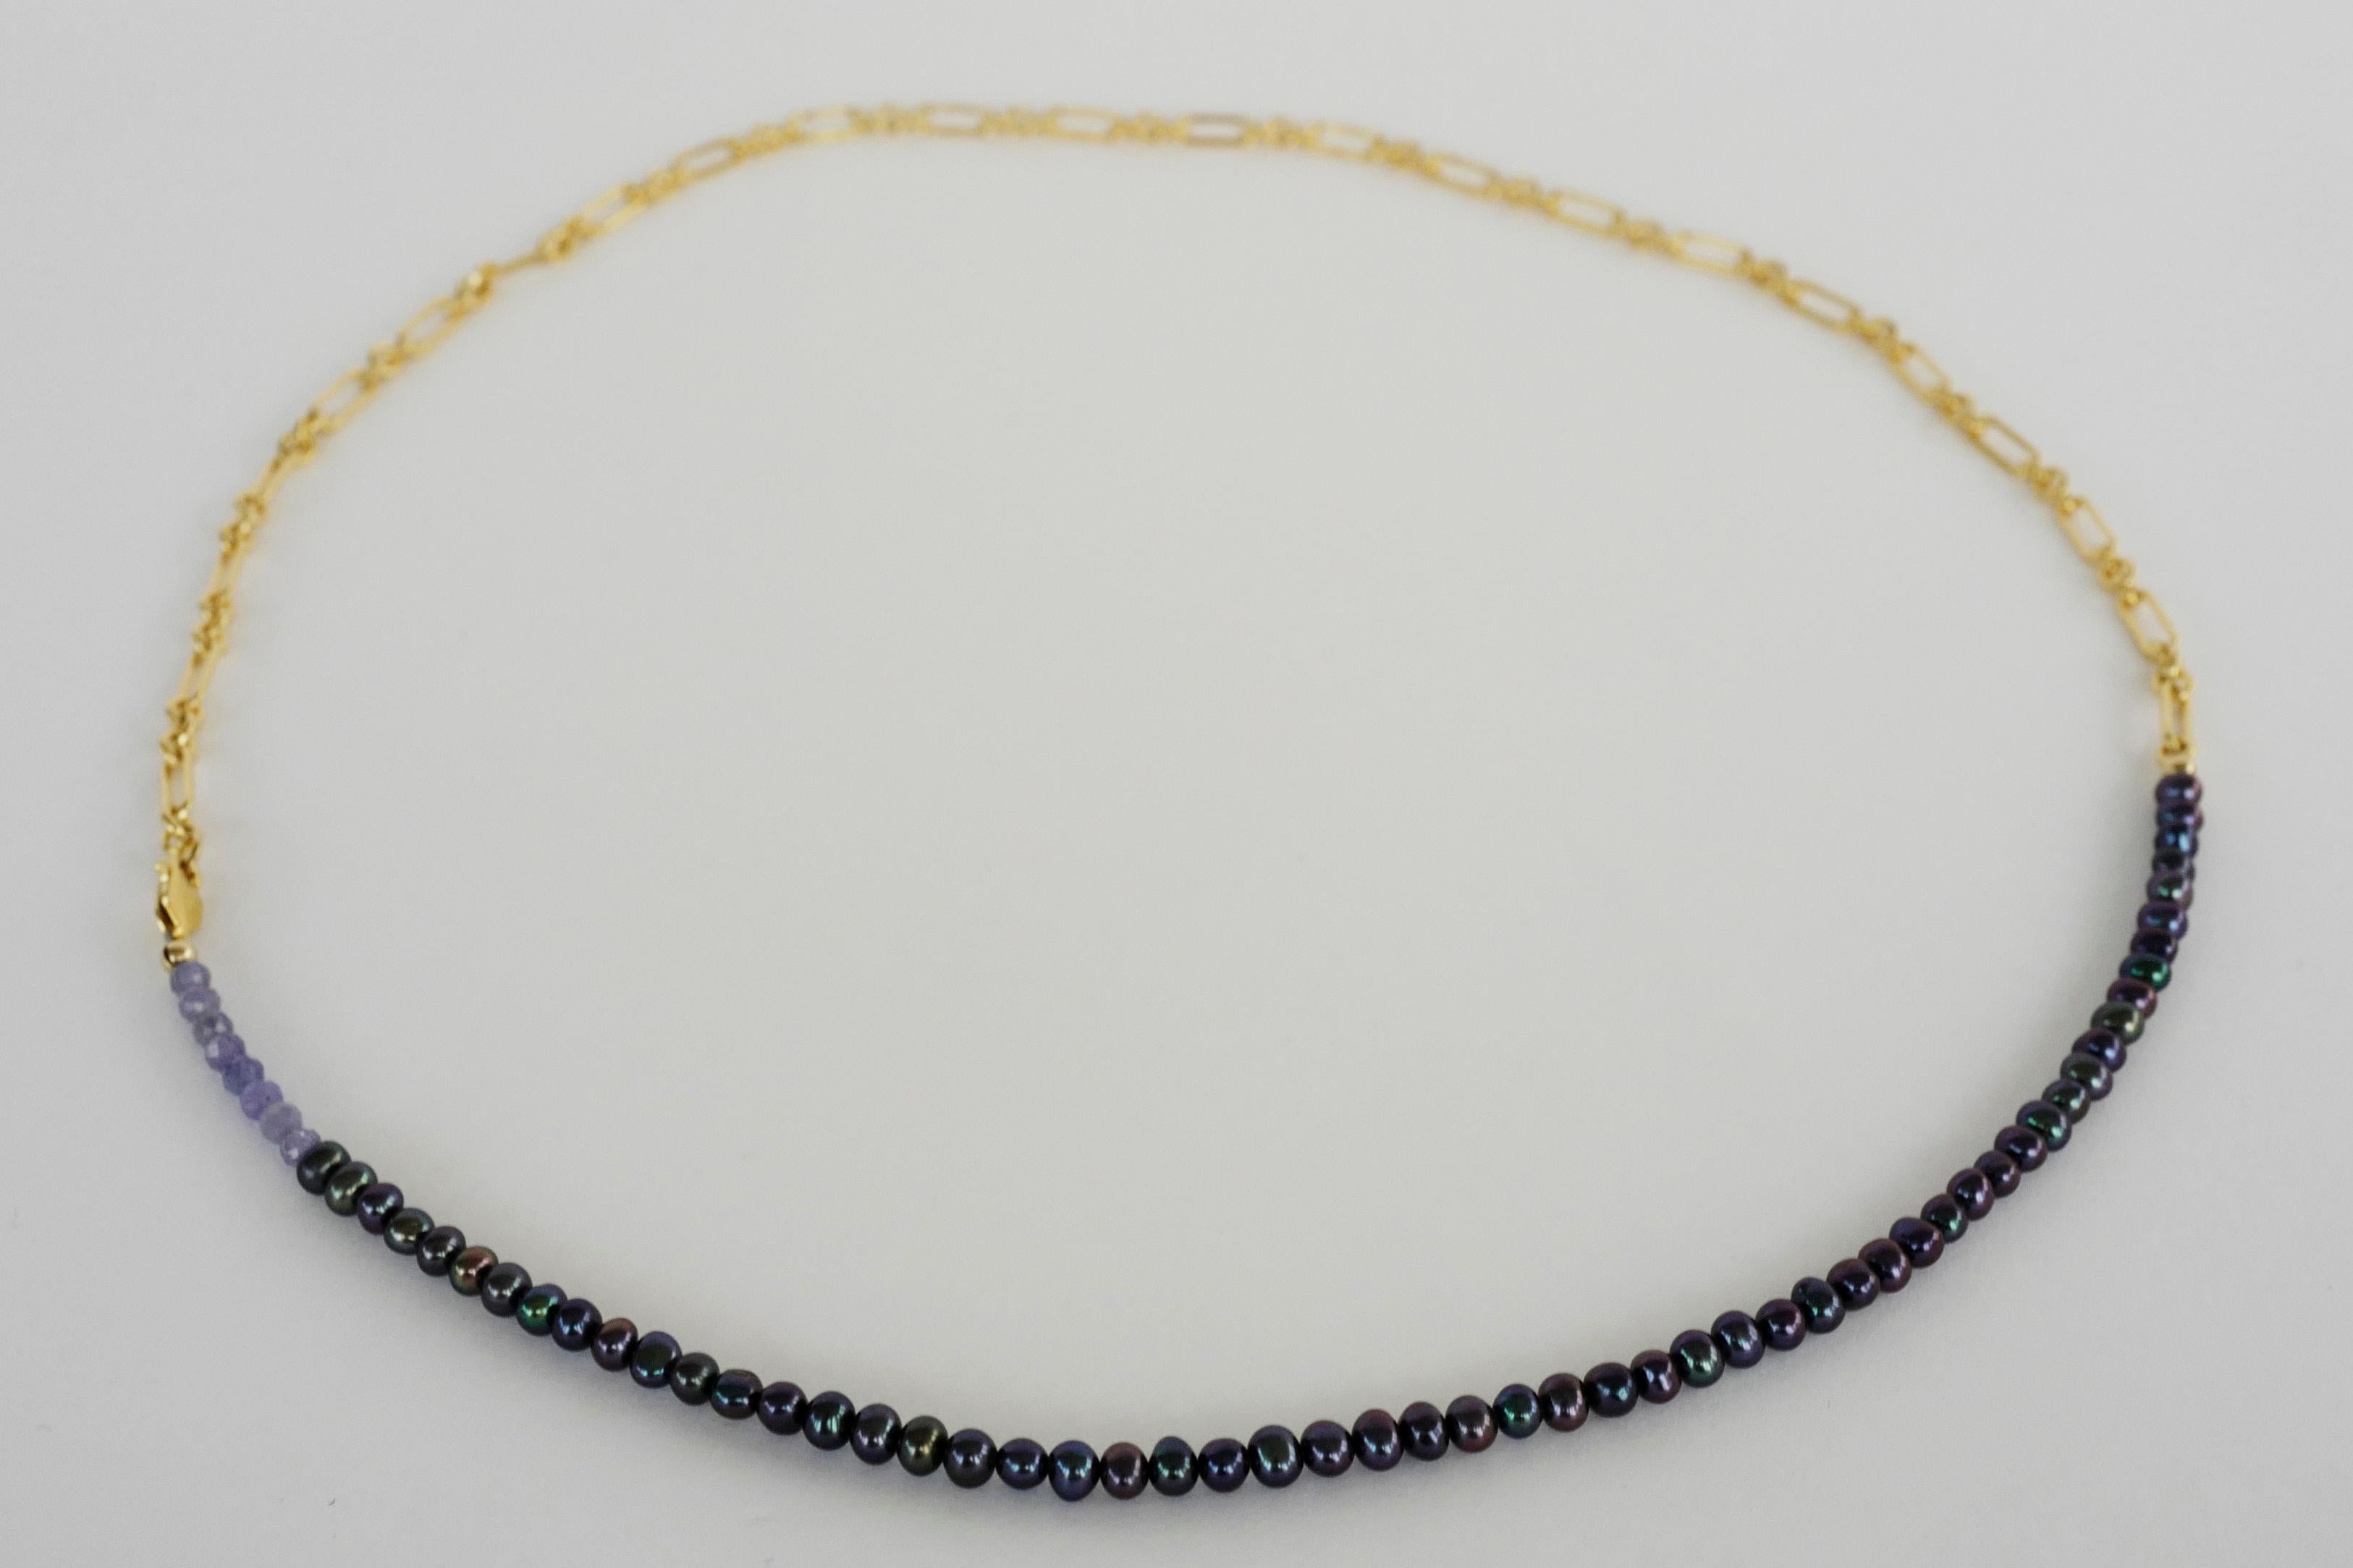 Round Cut Tanzanite Black Pearl Gold Filled Chain Beaded Choker Necklace For Sale